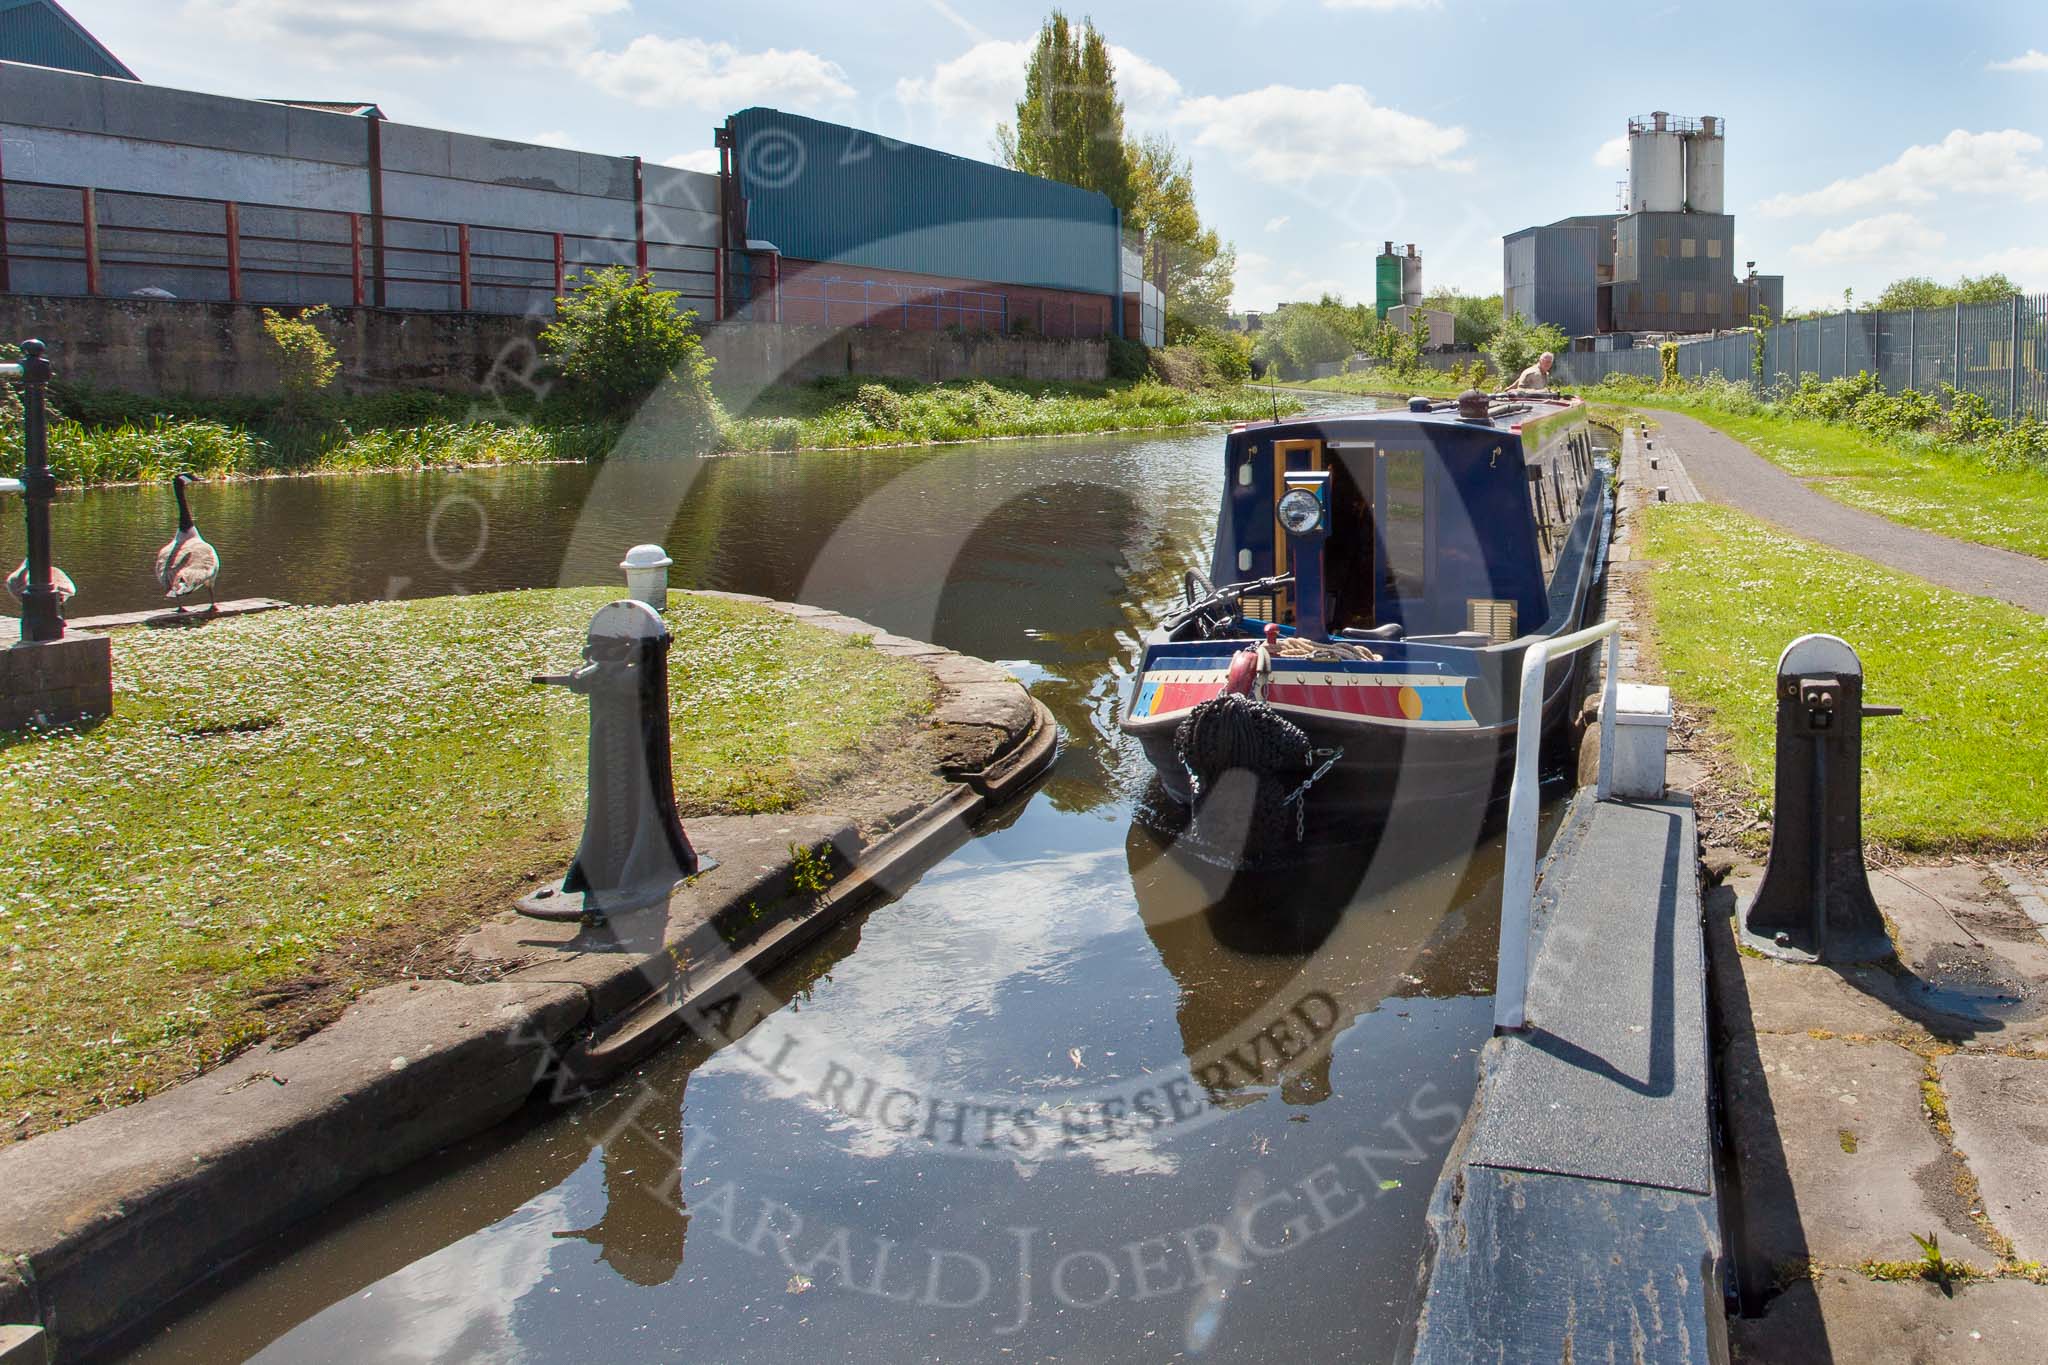 BCN Marathon Challenge 2013: NB "Felonious Mongoose" at Oldbury Top Lock on the Titford Canal, on the way back from from Titford Pools to the BCN Old Main Line..
Birmingham Canal Navigation,


United Kingdom,
on 25 May 2013 at 11:42, image #164